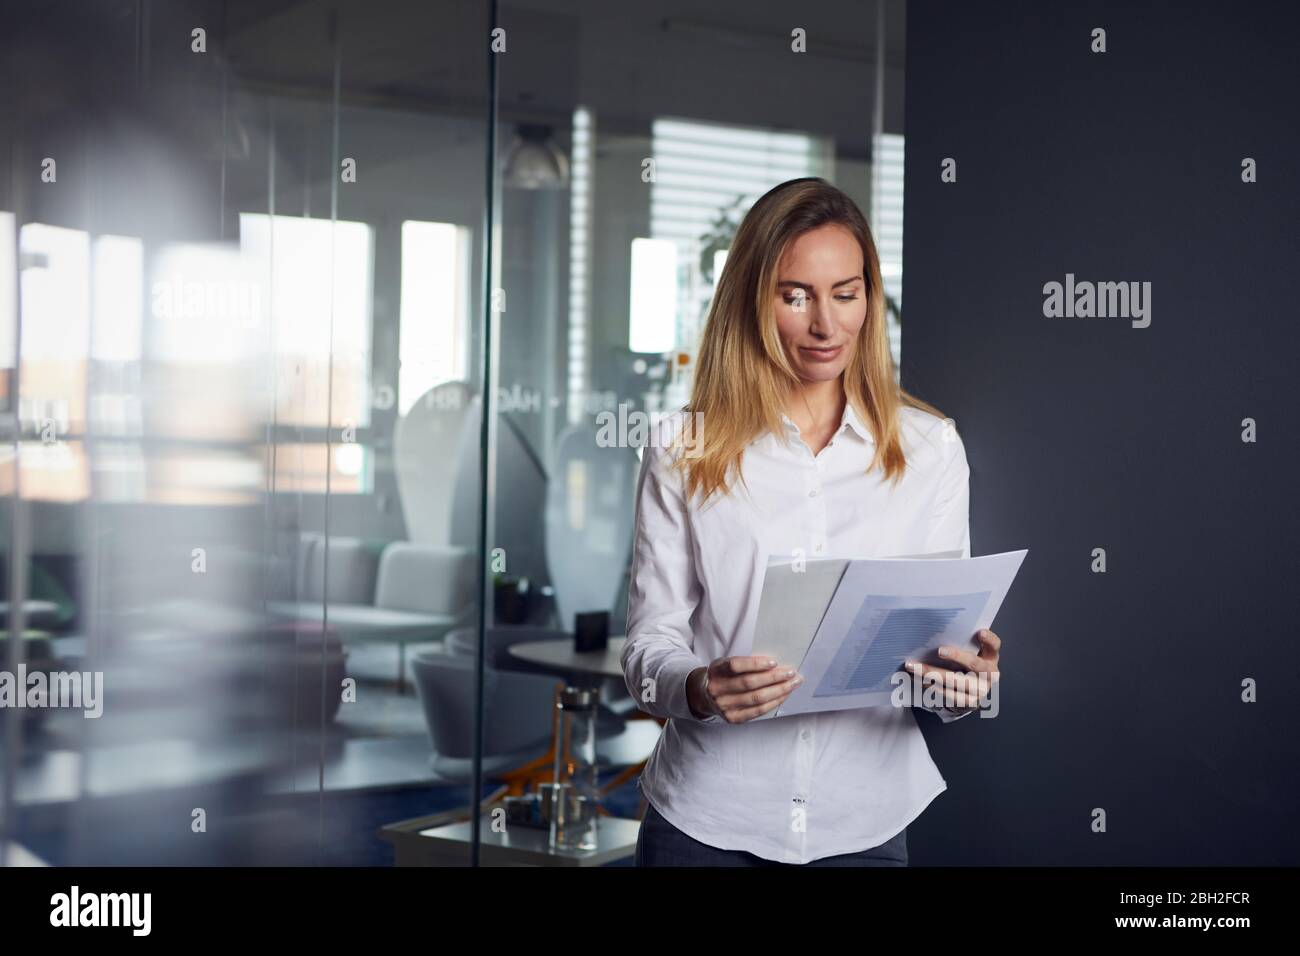 Portait of businesswoman reviewing papers in office Stock Photo